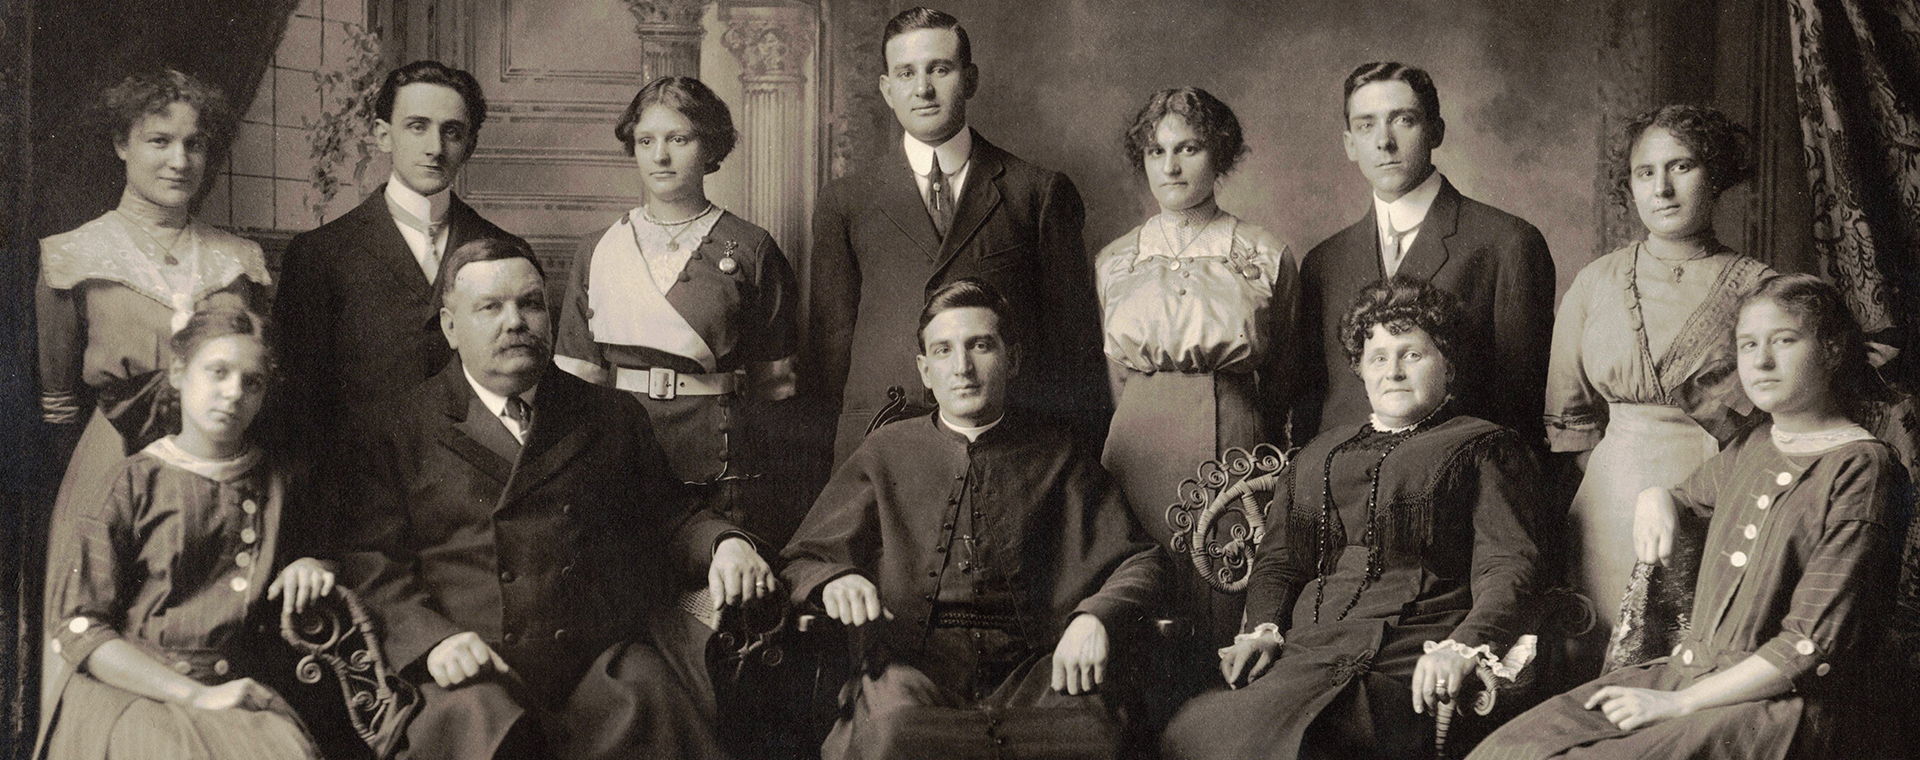 Black and white picture taken in studio. 12 people in their early 20th century clothes. In the front are seated Monsignor Alfred LePailleur, his parents and his two youngest sisters. Standing in the back are the other members of the siblings.